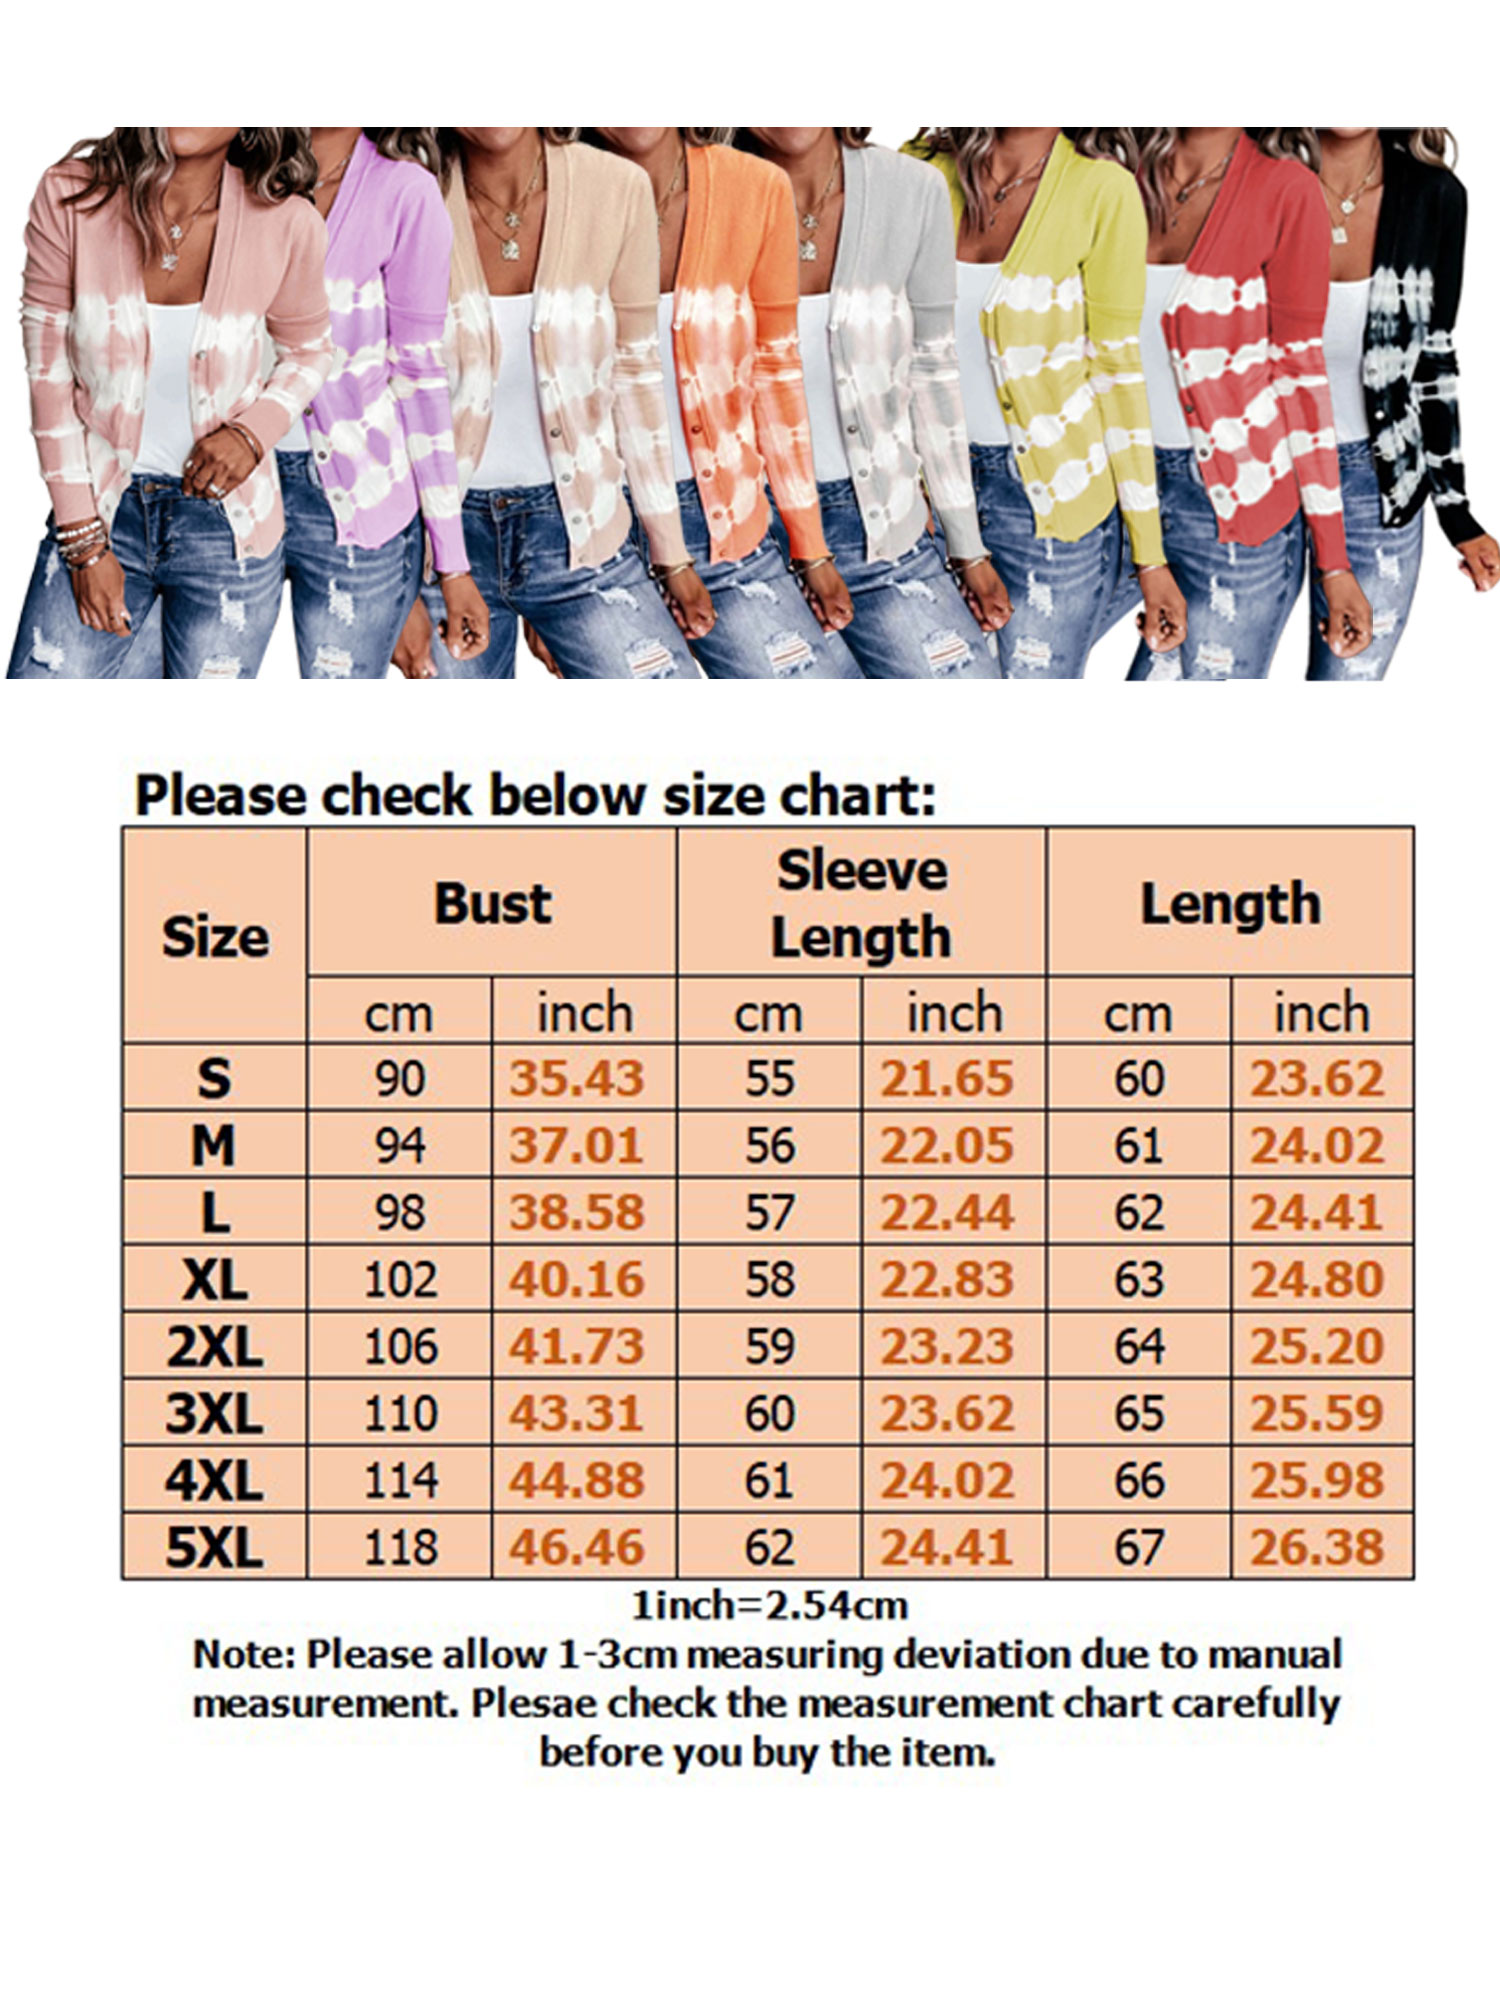 Christmas Gift For Familys LIDYCE Oversized Loose Long Sleeve Cardigan Sweater Coat For Women Plus Size Blouse Tops Ladies Button Down Coat Tops Jacket Outwear Tops - image 2 of 2